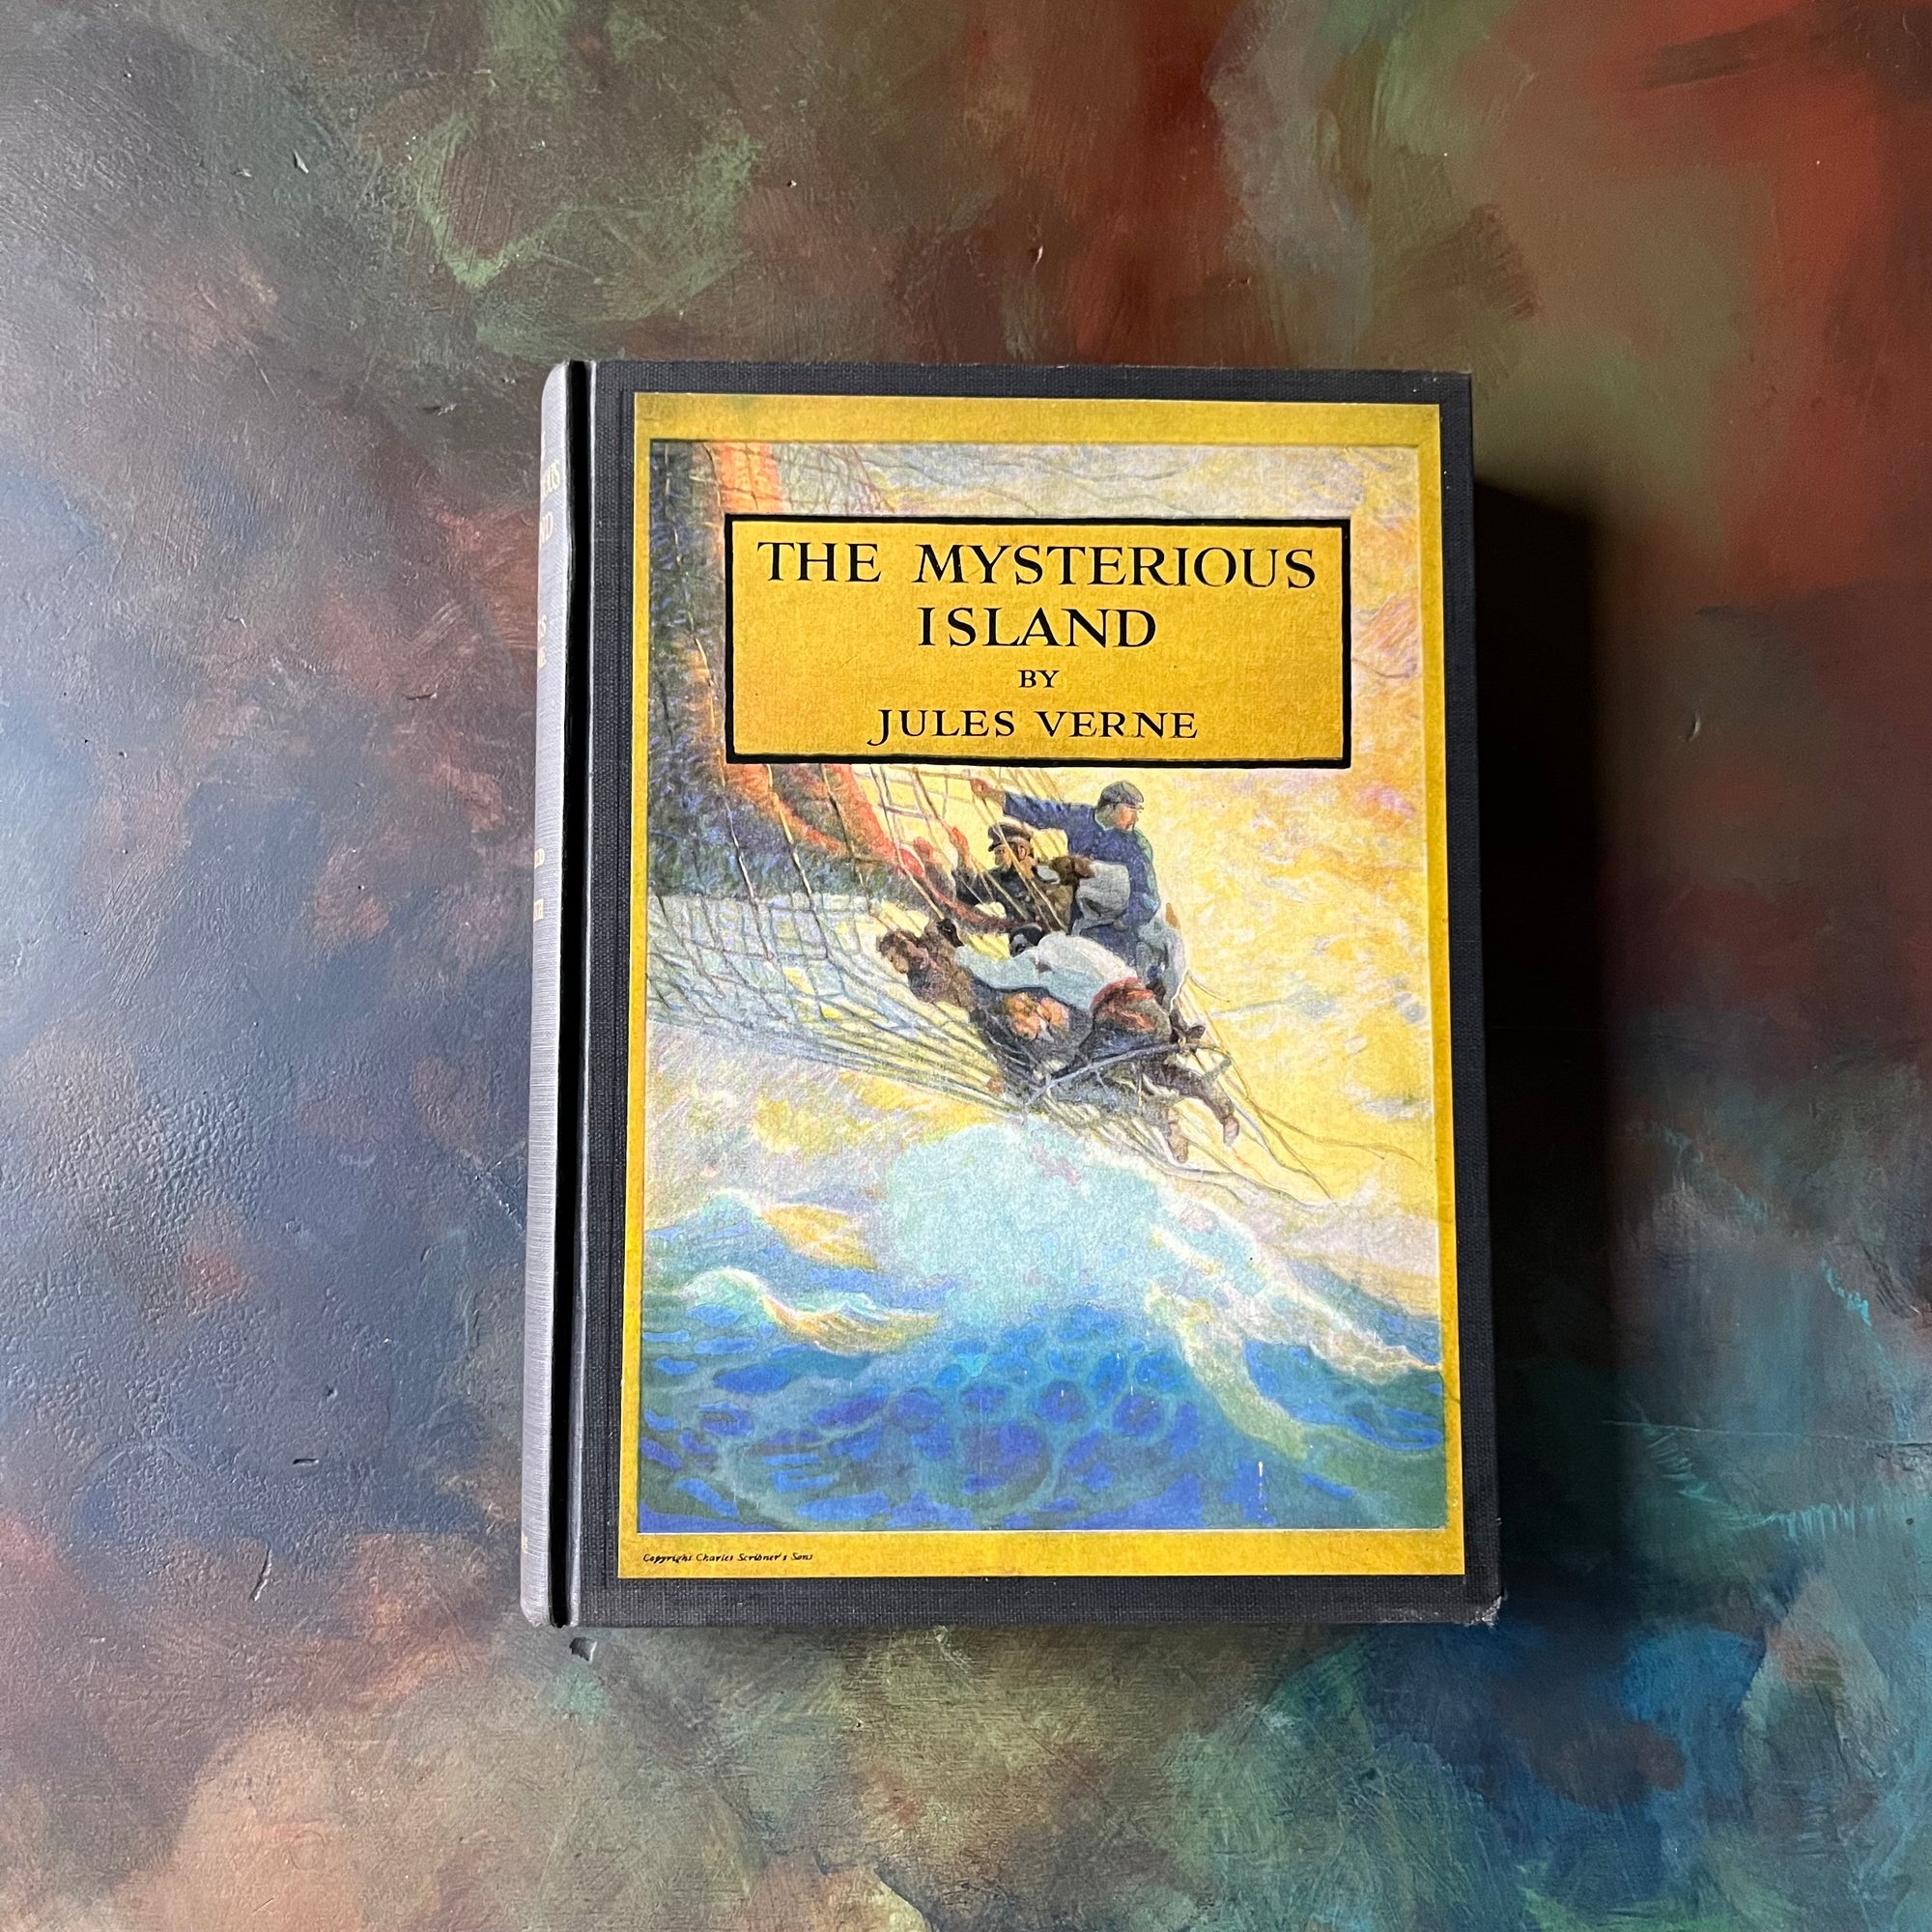 The Mysterious Island by Jules Verne with Illustrations by N. C. Wyeth-1951 Charles Scribner's Sons Edition-vintage classic children's literature-view of the front cover with a full illustration by N.C. Wyeth (which is on display at the Brandywine Museum in Pennsylvania)